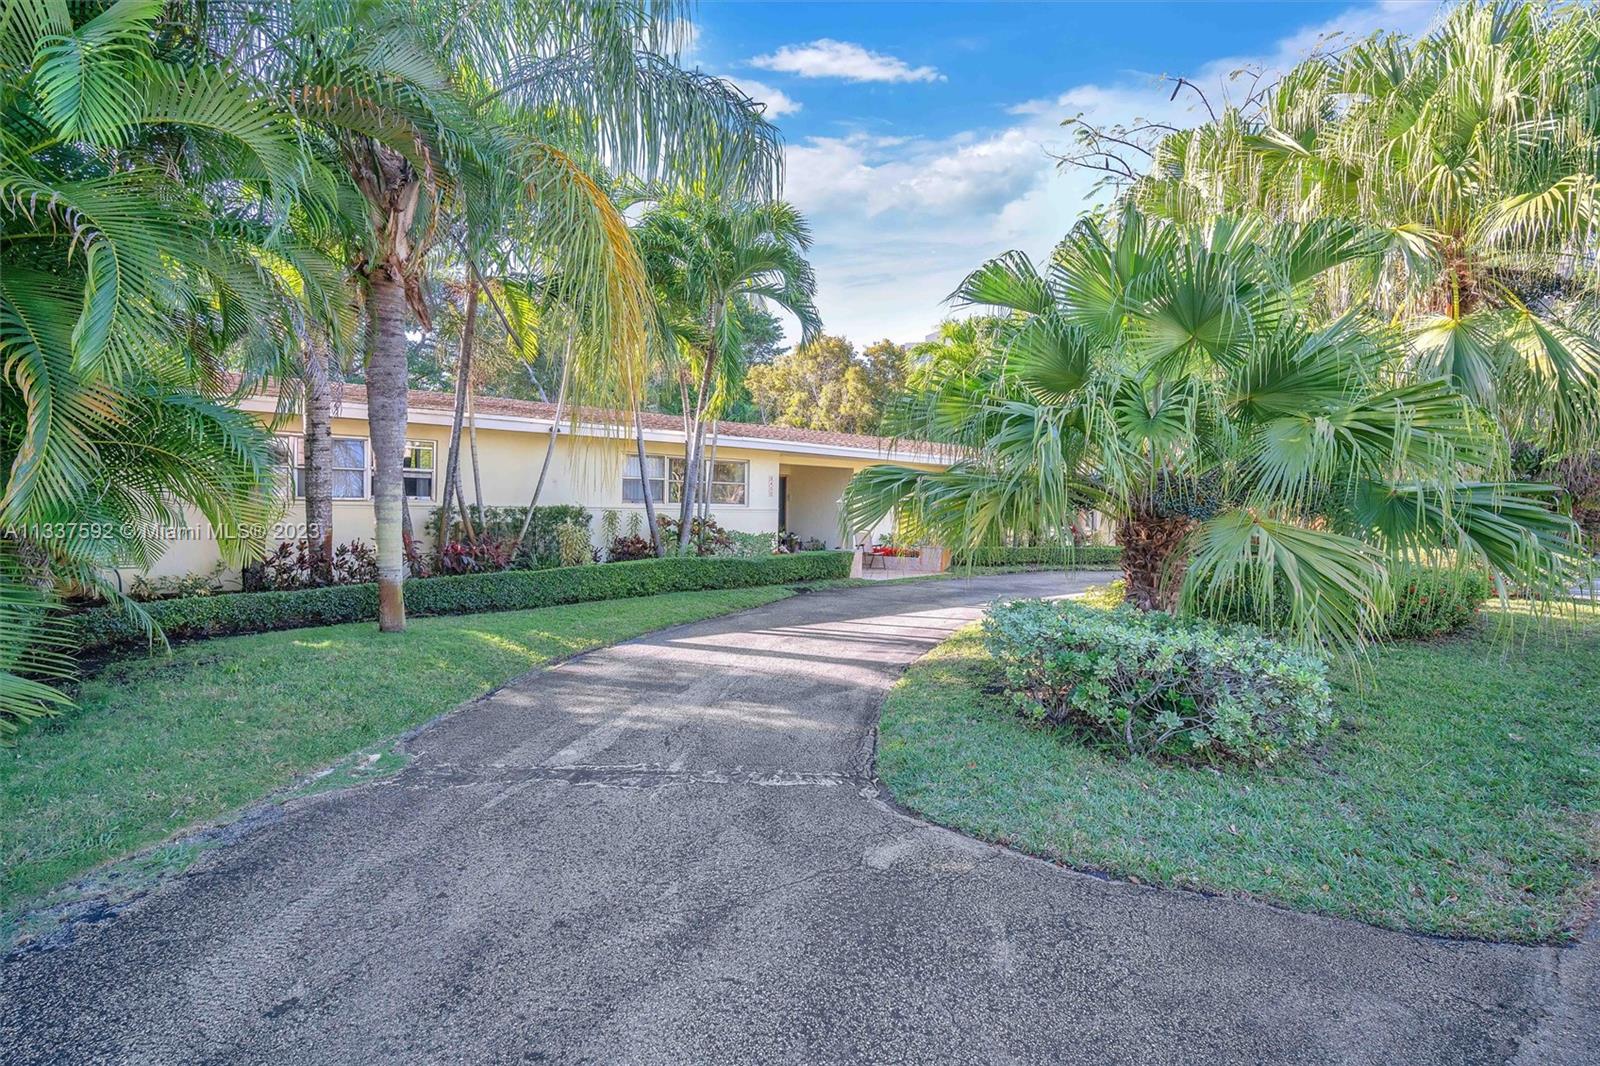 Own a piece of the highly desired North Pinecrest for a fraction of the cost. This 3,000 sqft home has a lot of natural light and sits on an oversized lot with over 17,370 sqft. Never worry about a power outrage because this house has NATURAL GAS BACK-UP GENERATOR to power your entire home. Enjoy the backyard oasis with a beautiful tiki hut and a large heated pool that has been redone with diamond brite to give you years of stress free enjoyment. Once you live here you can enjoy all the perks of living in Pinecrest, which includes the best public & private schools, unlimited options for shopping & dining, and easy access to US1 and highways.